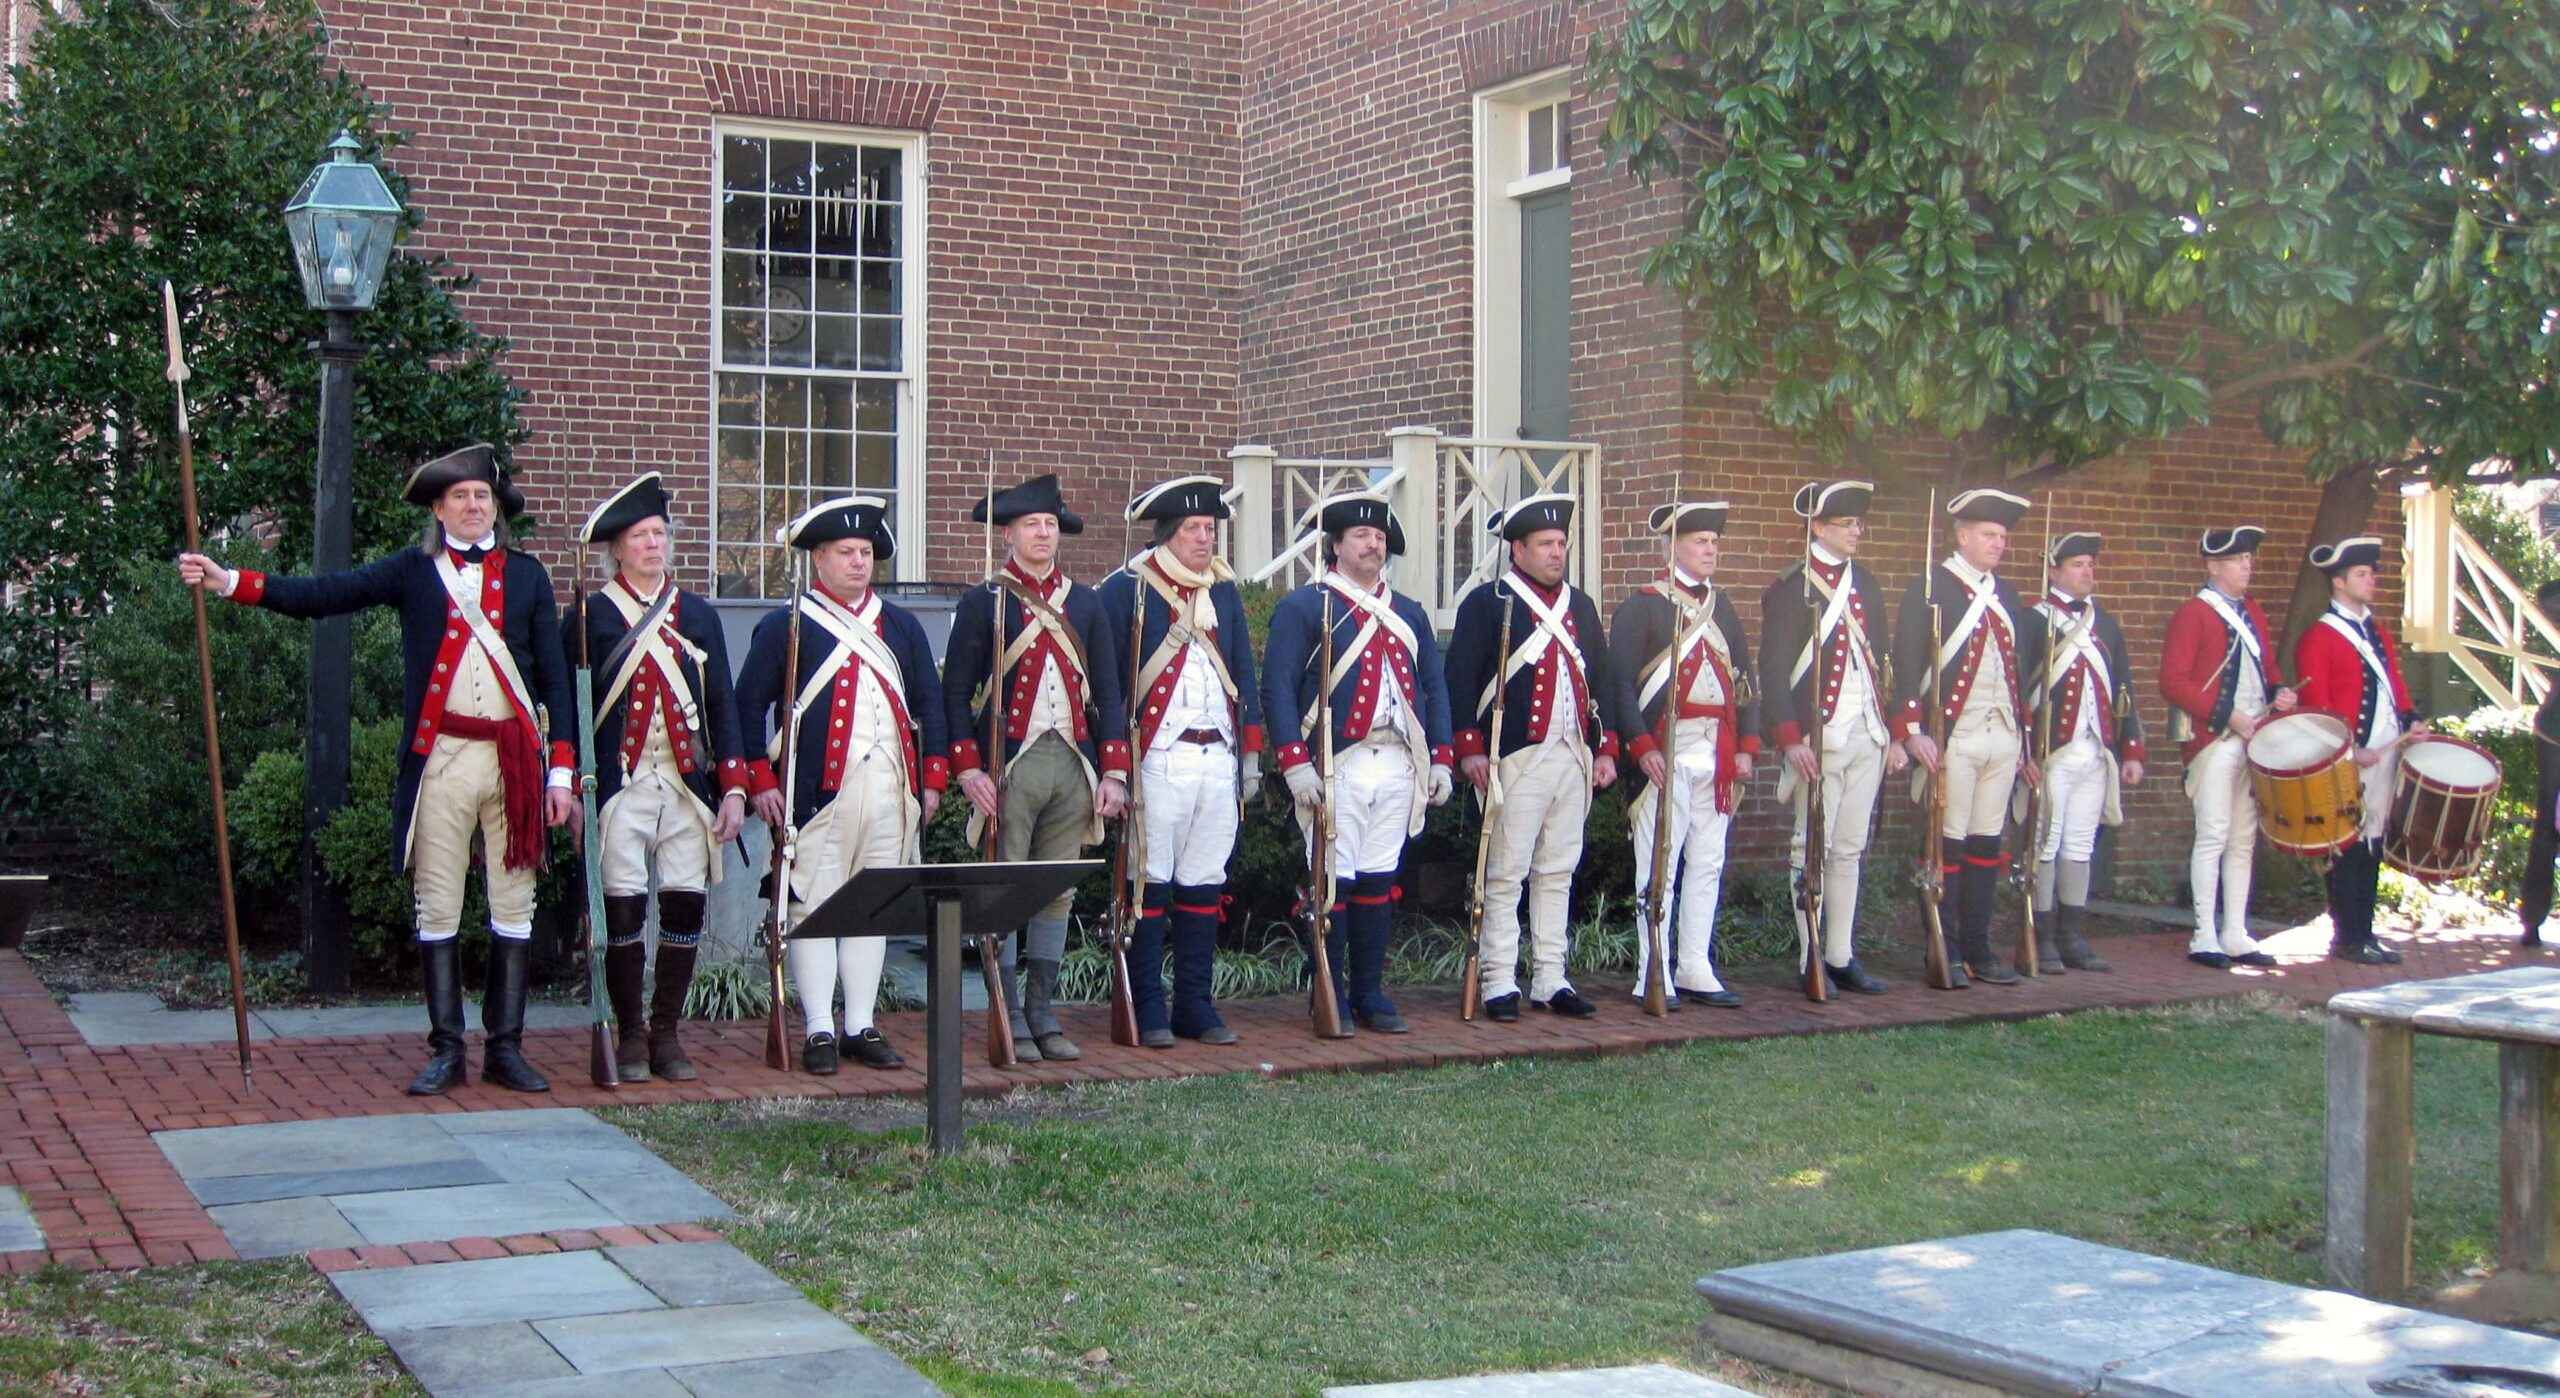 Old Presbyterian Meeting House, Alexandria, Virginia, Tomb of the Unknown Revolutionary War Soldier. Wreath Laying ceremony prior to George Washington's Birthday Parade.